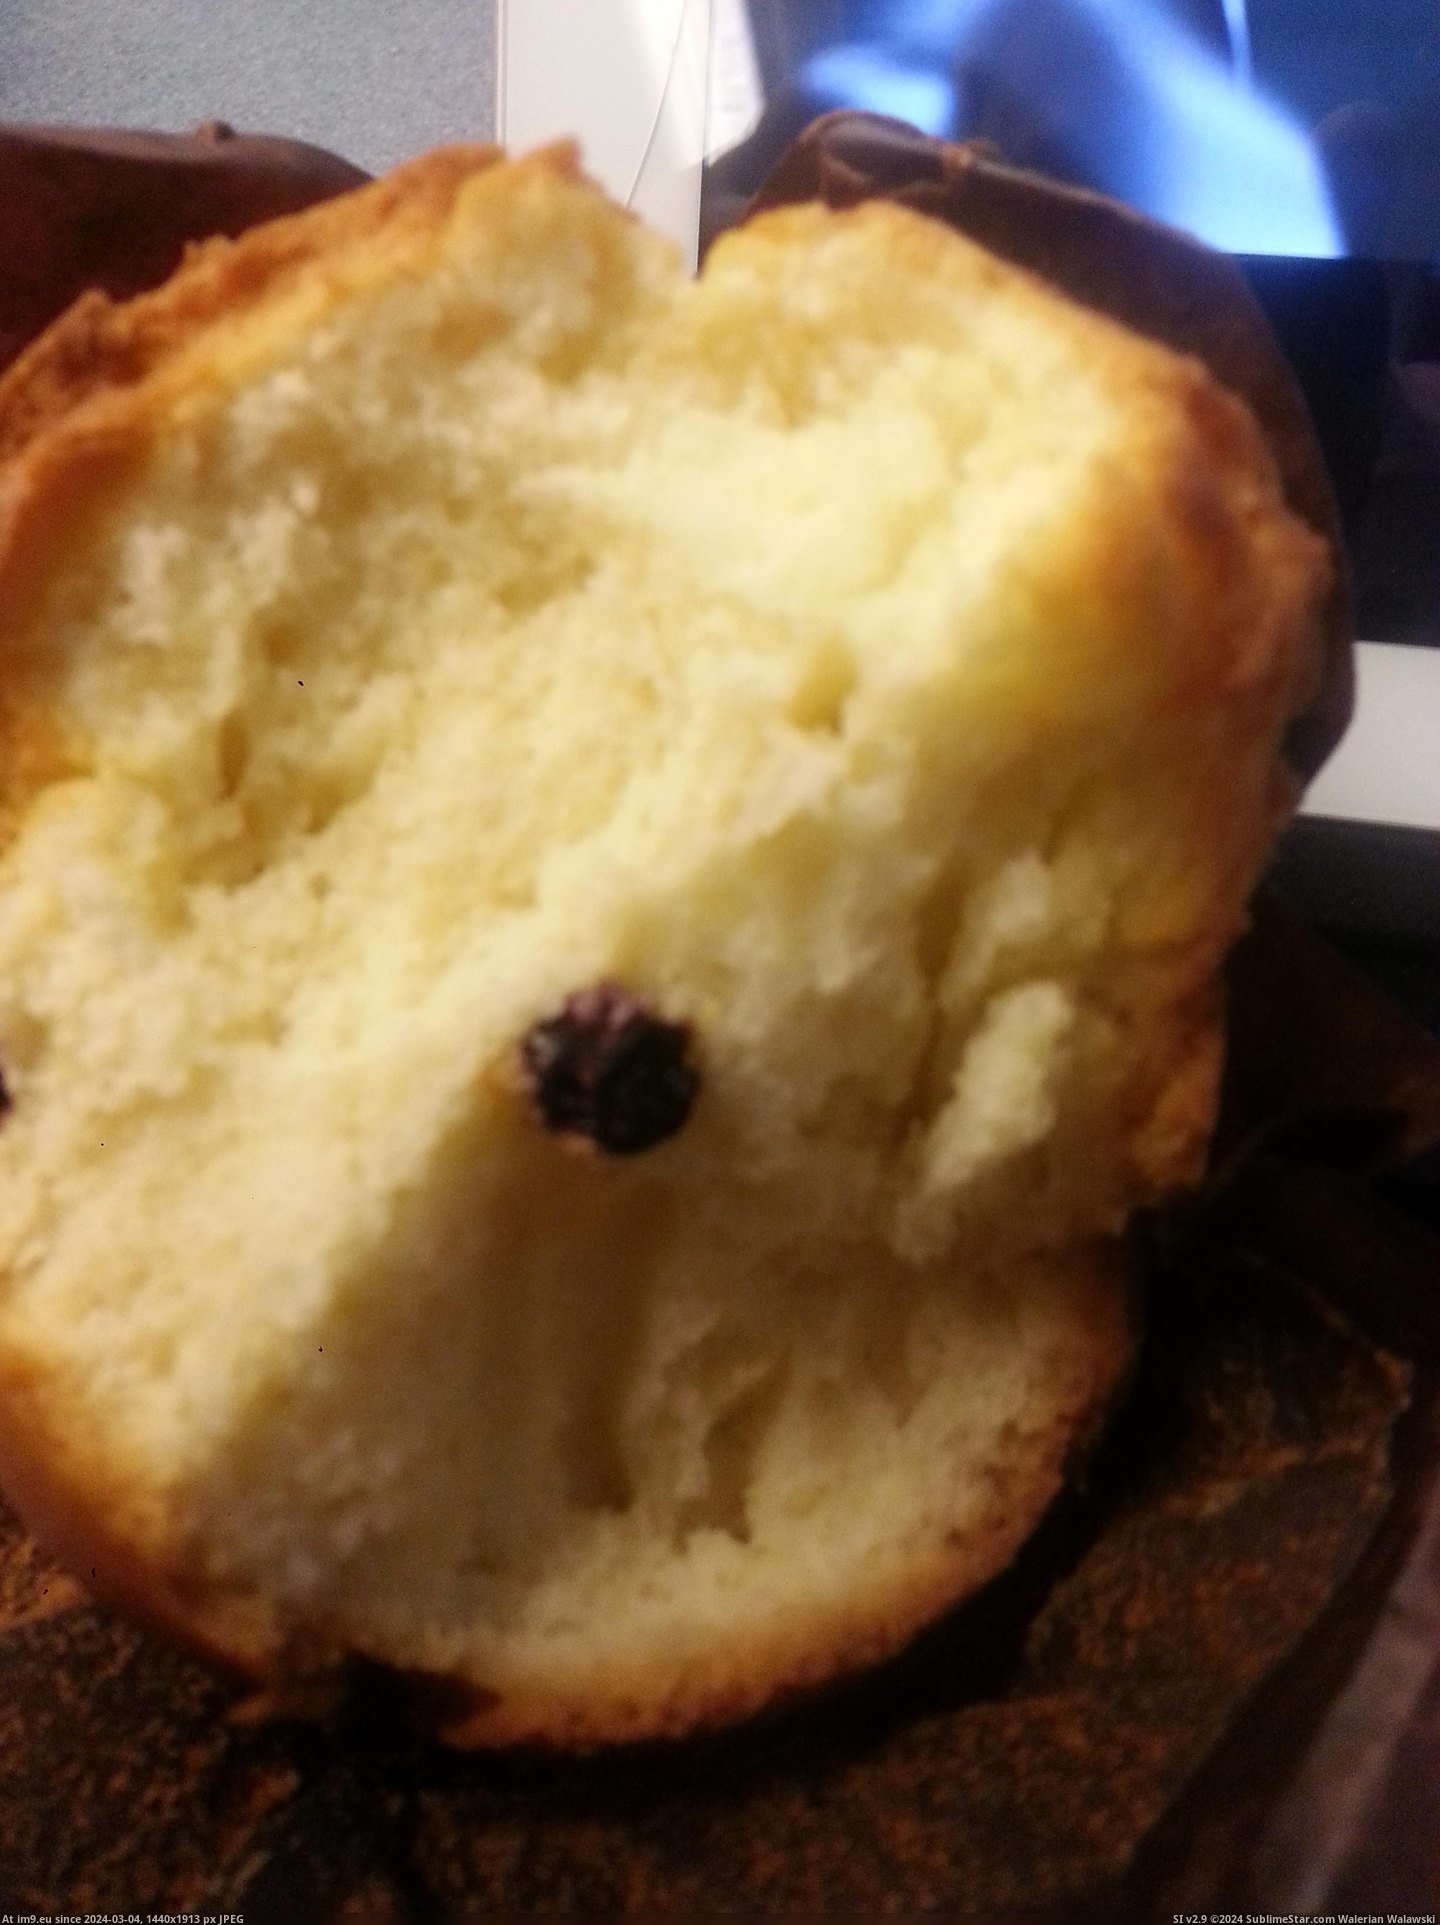 #Funny #Description #Expect #Blueberry #Muffin #Ordered #Accurate [Funny] Ordered a blueberry muffin. Got 1 blueberry. I didnt expect the description to be so accurate. Pic. (Изображение из альбом My r/FUNNY favs))